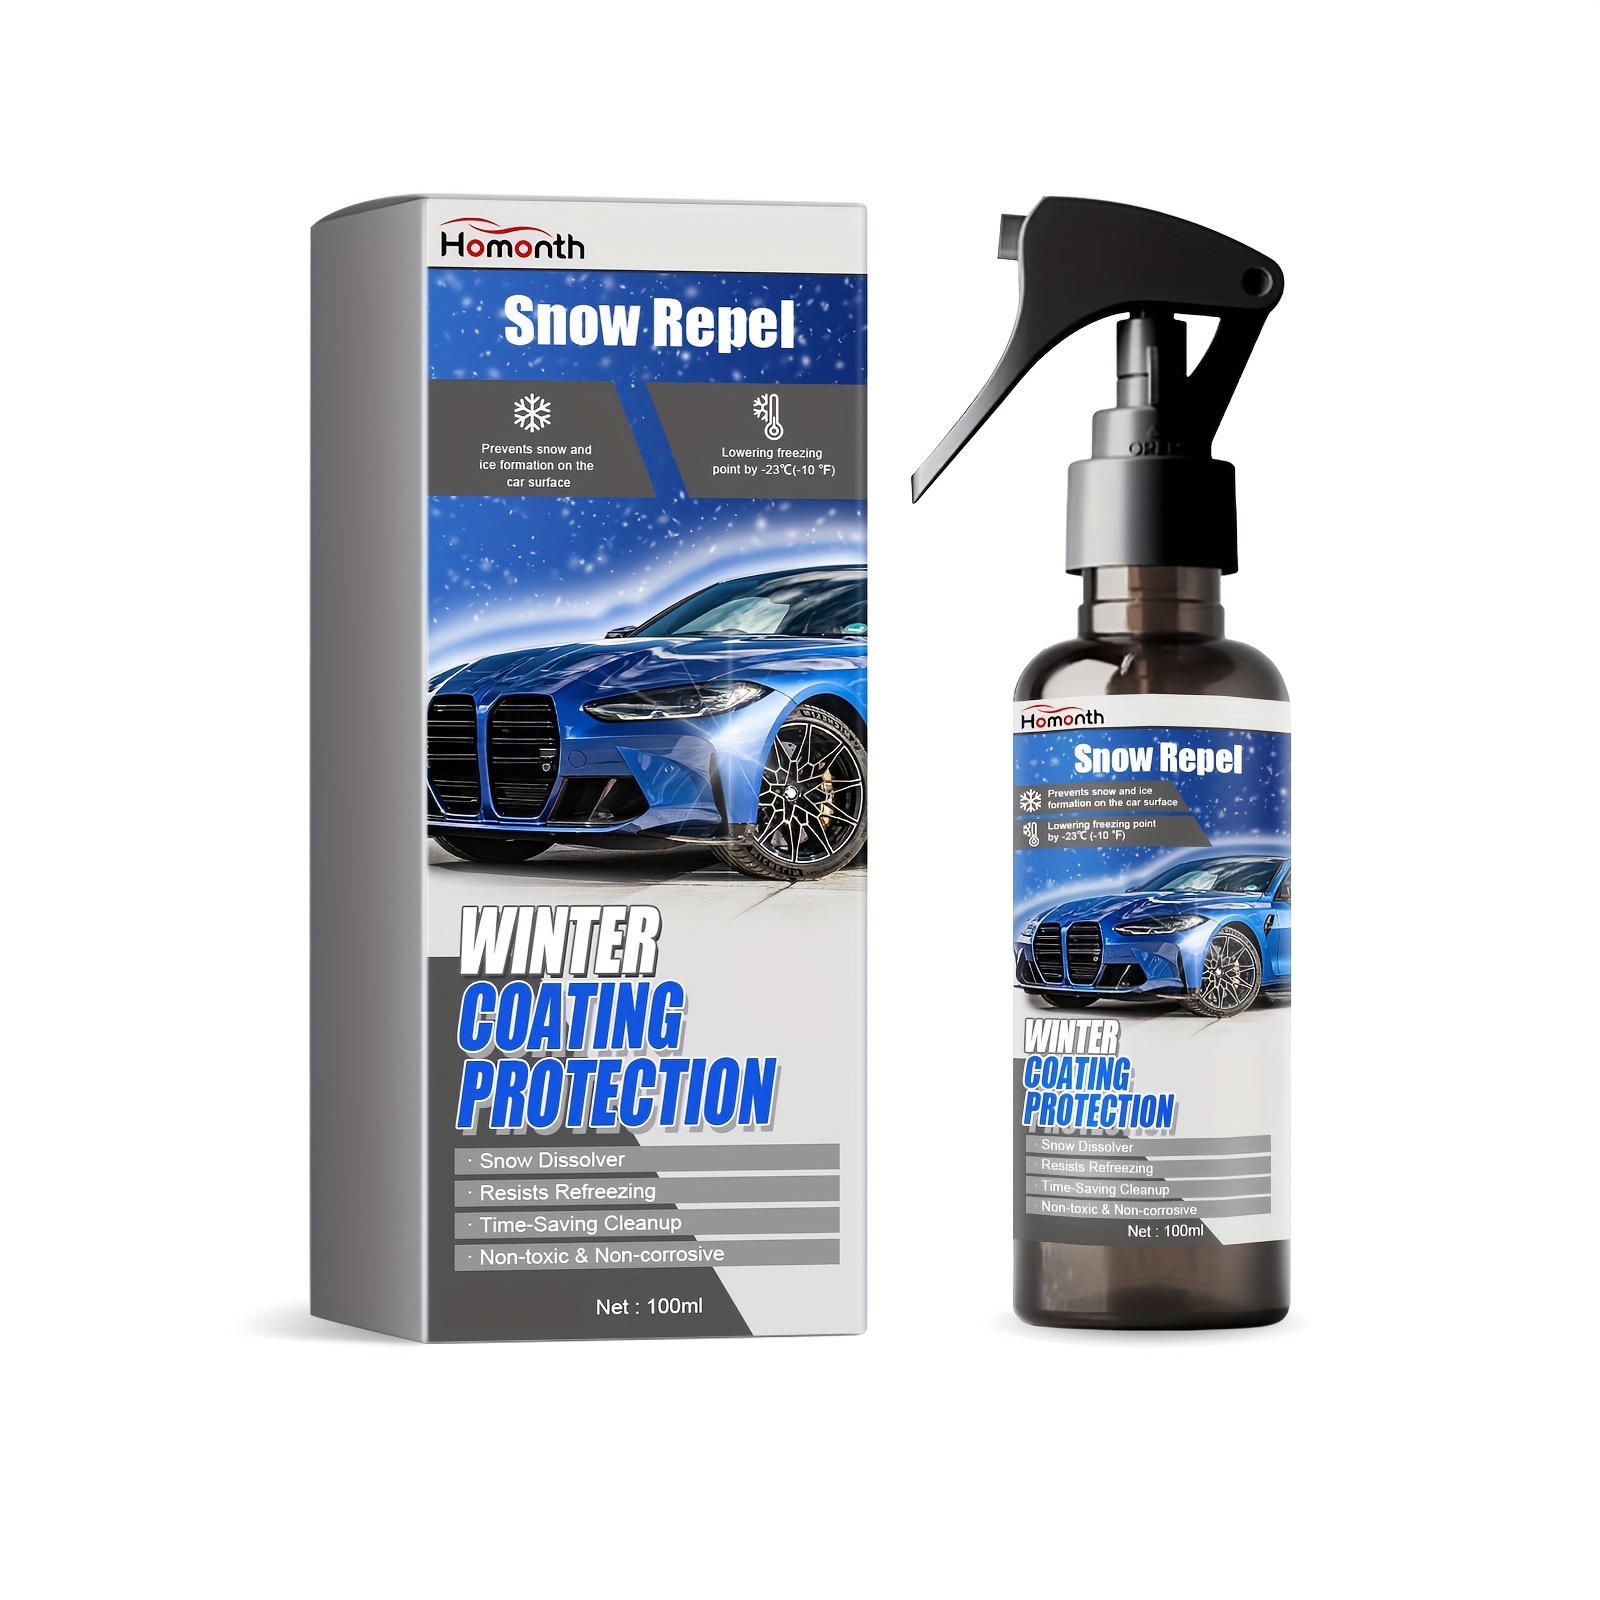  Snow Melting Spray Deicing Agent for Car Windshields